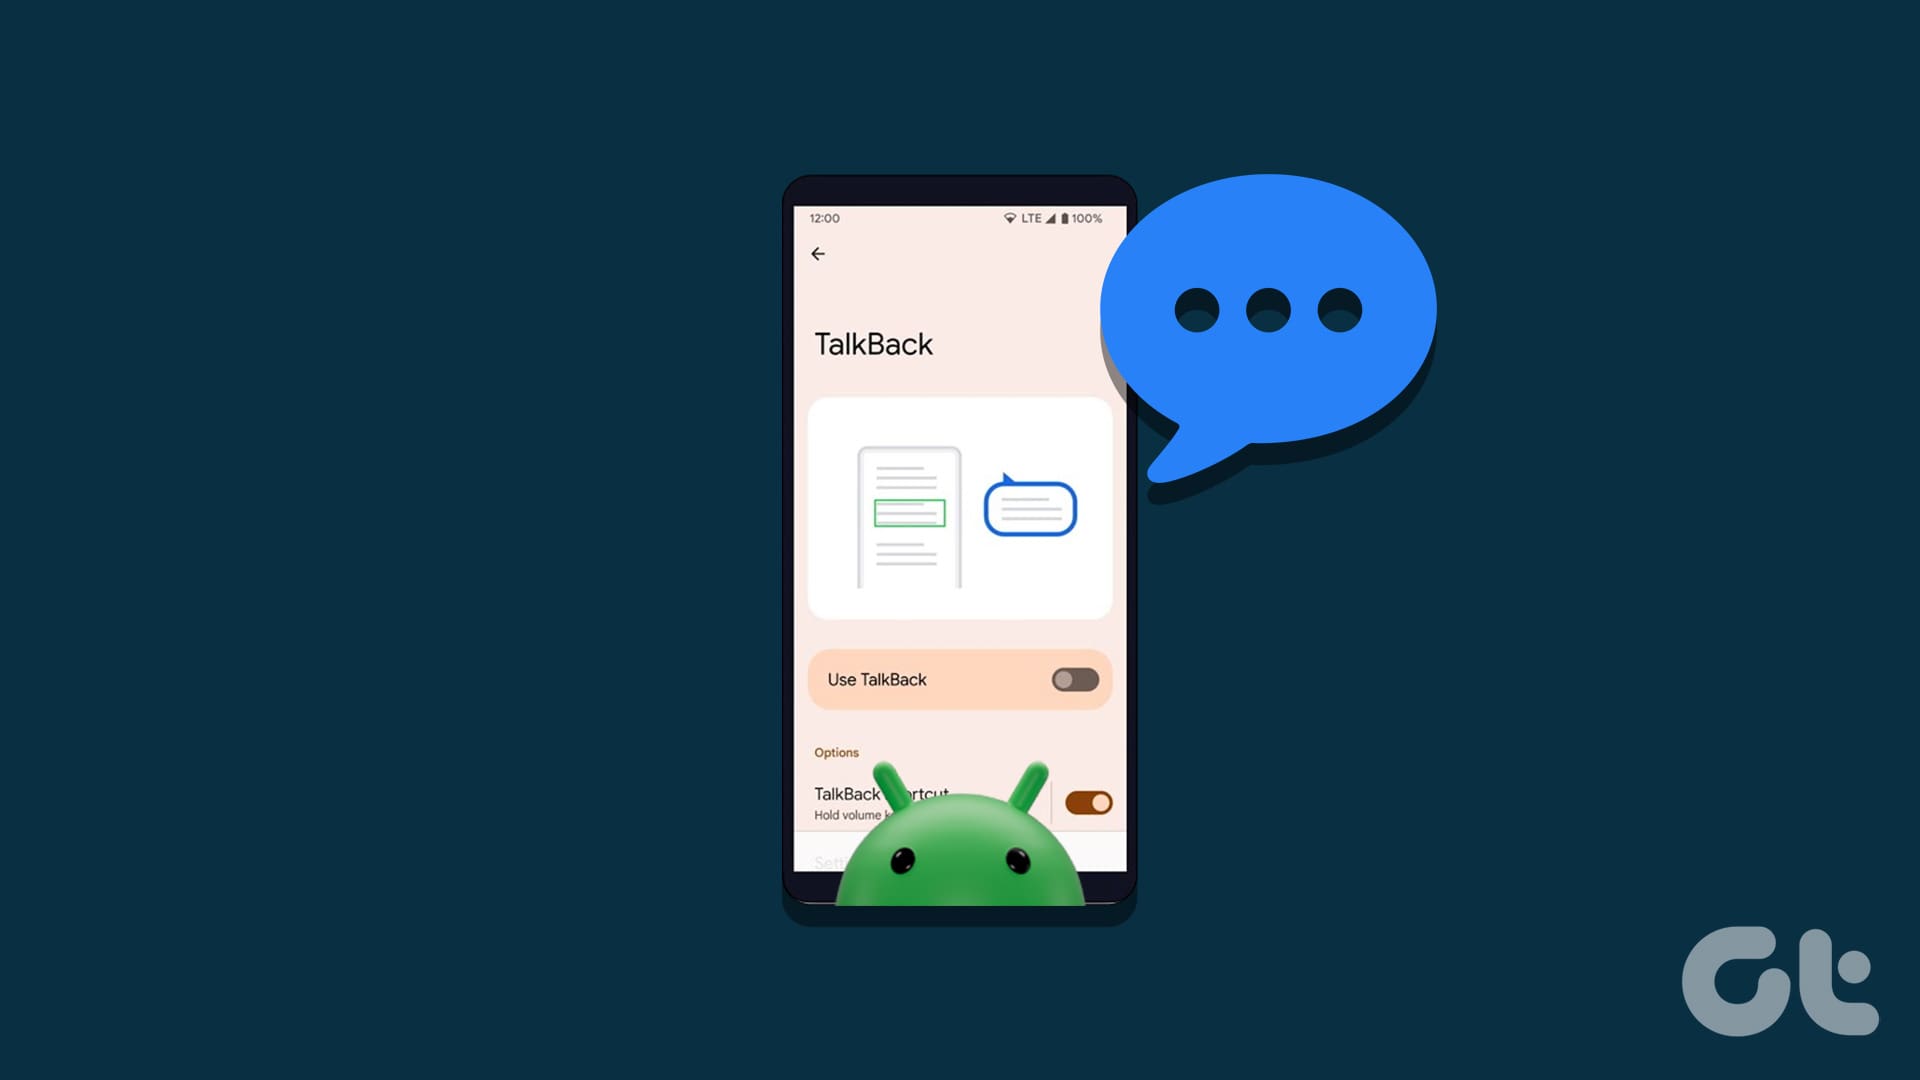 How to Turn On or Off TalkBack on Android